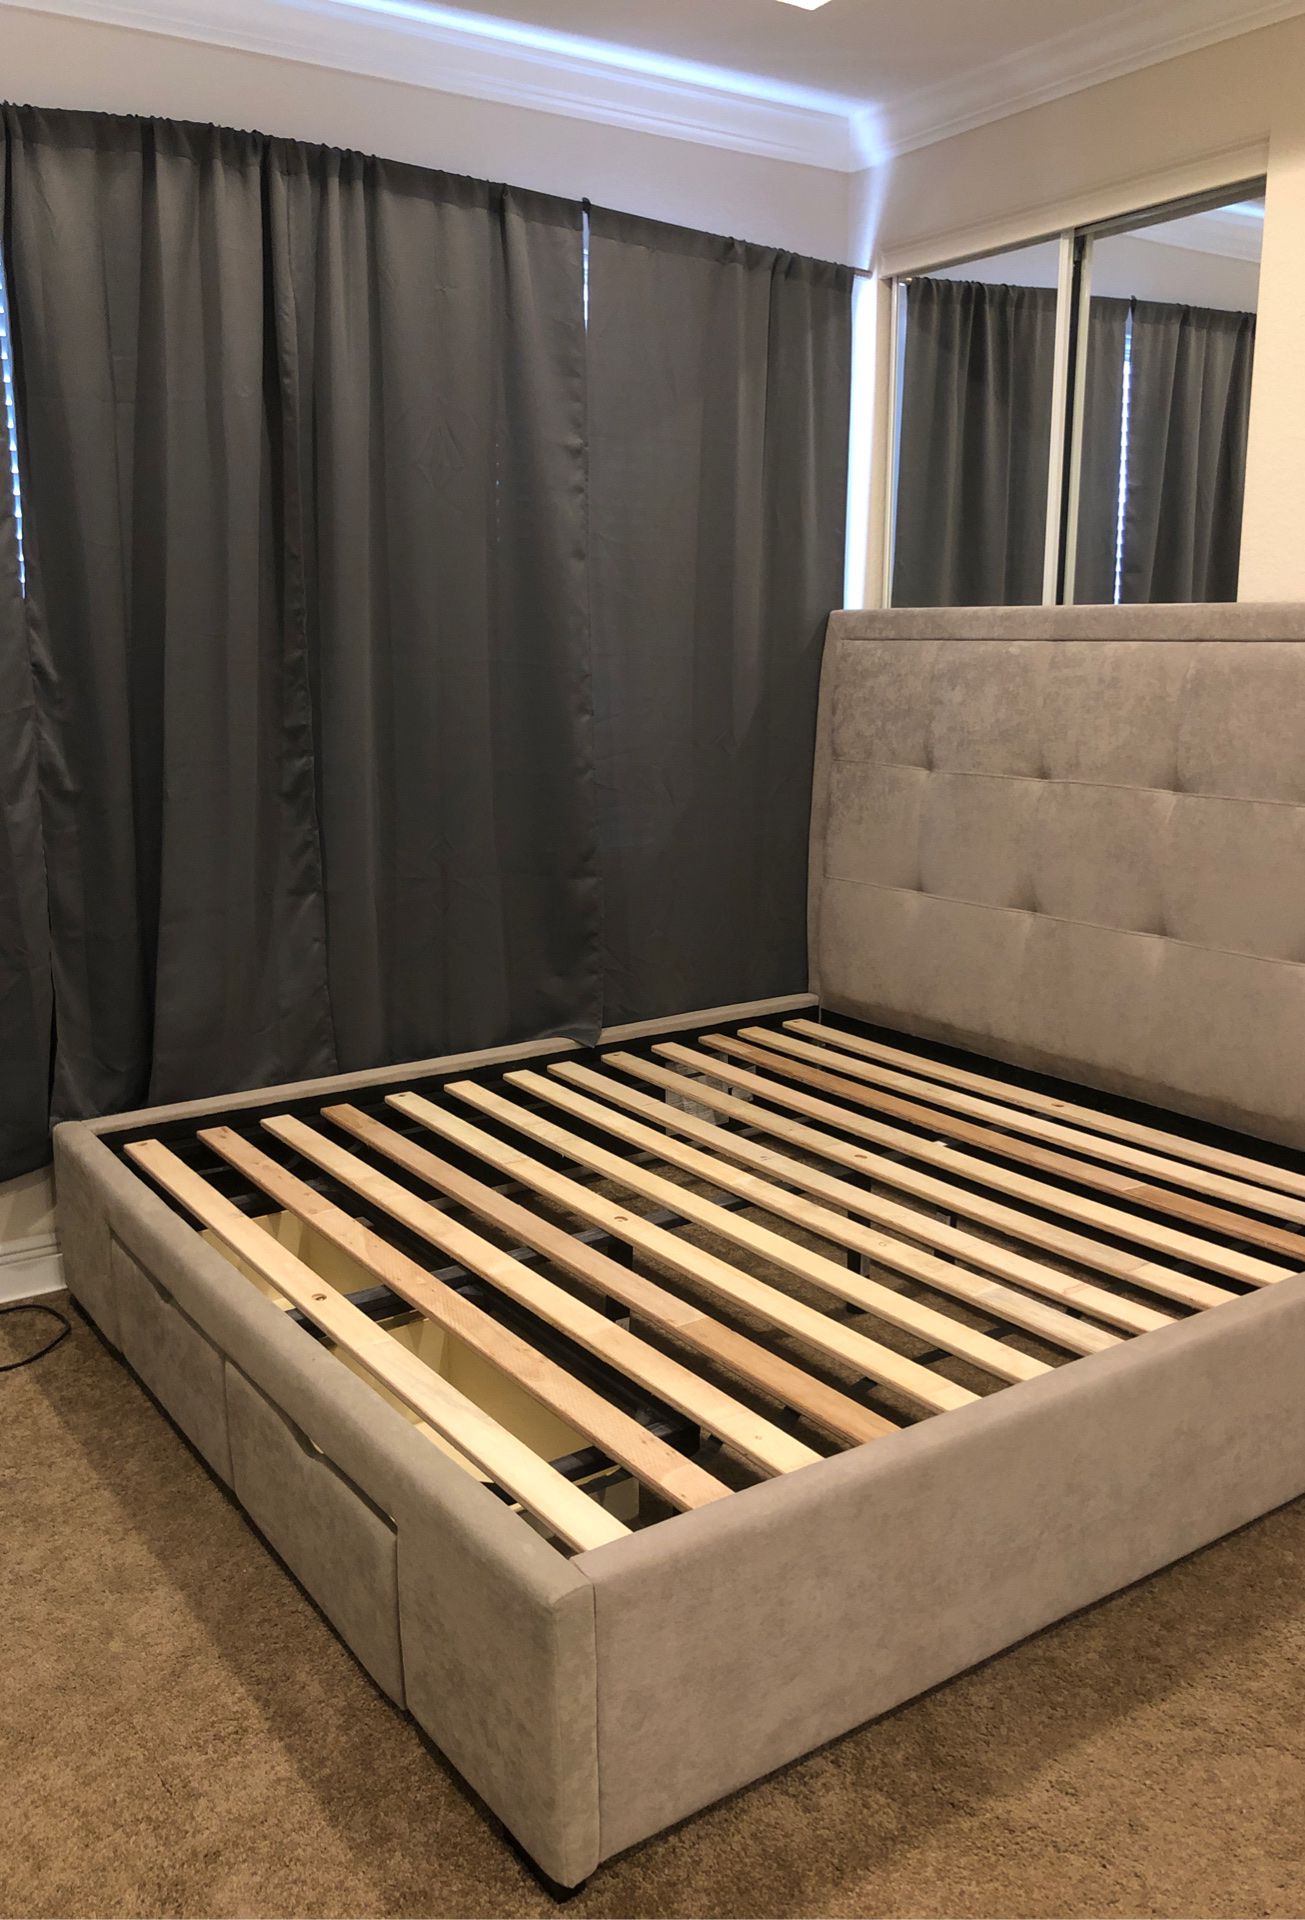 King size bed for sale. Good condition.